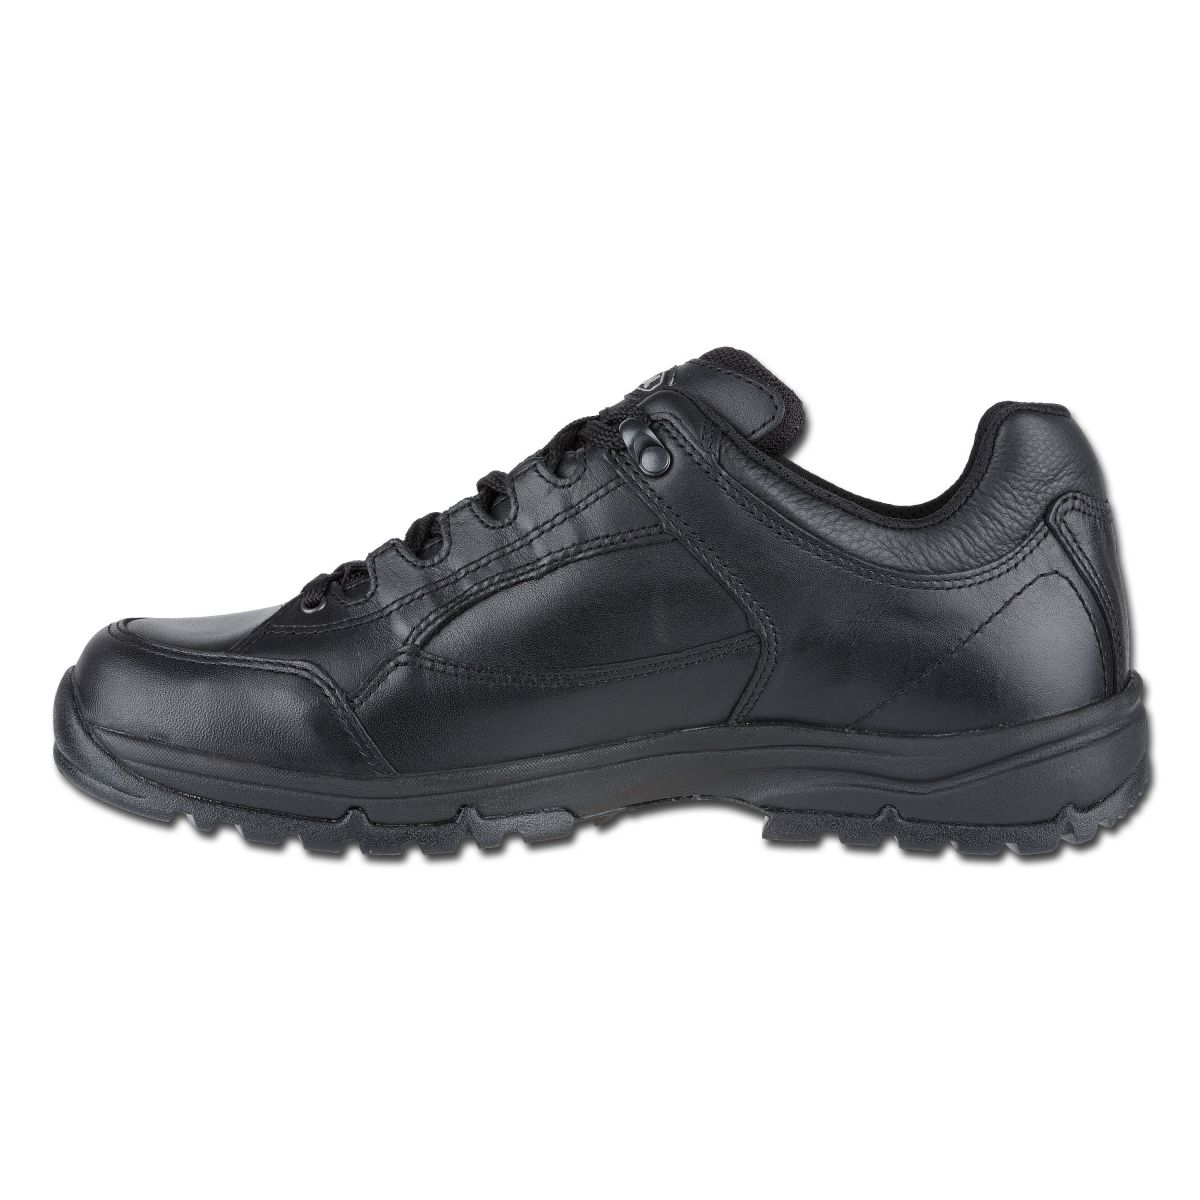 Purchase the Meindl Shoe Security Guard black by ASMC